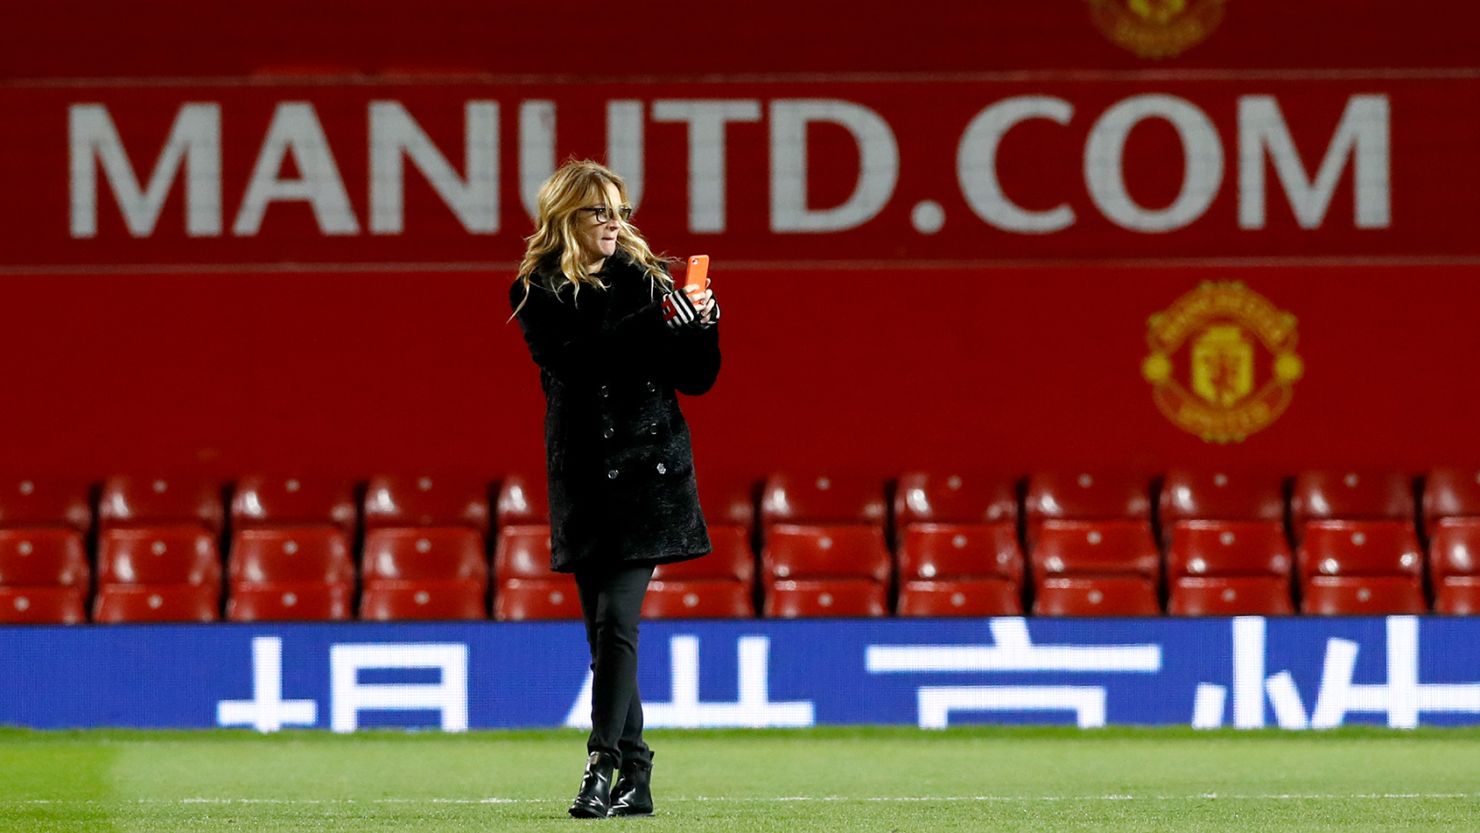 Julia Roberts takes photographs on the pitch after Manchester United's Premier League match at Old Trafford against West Ham. 